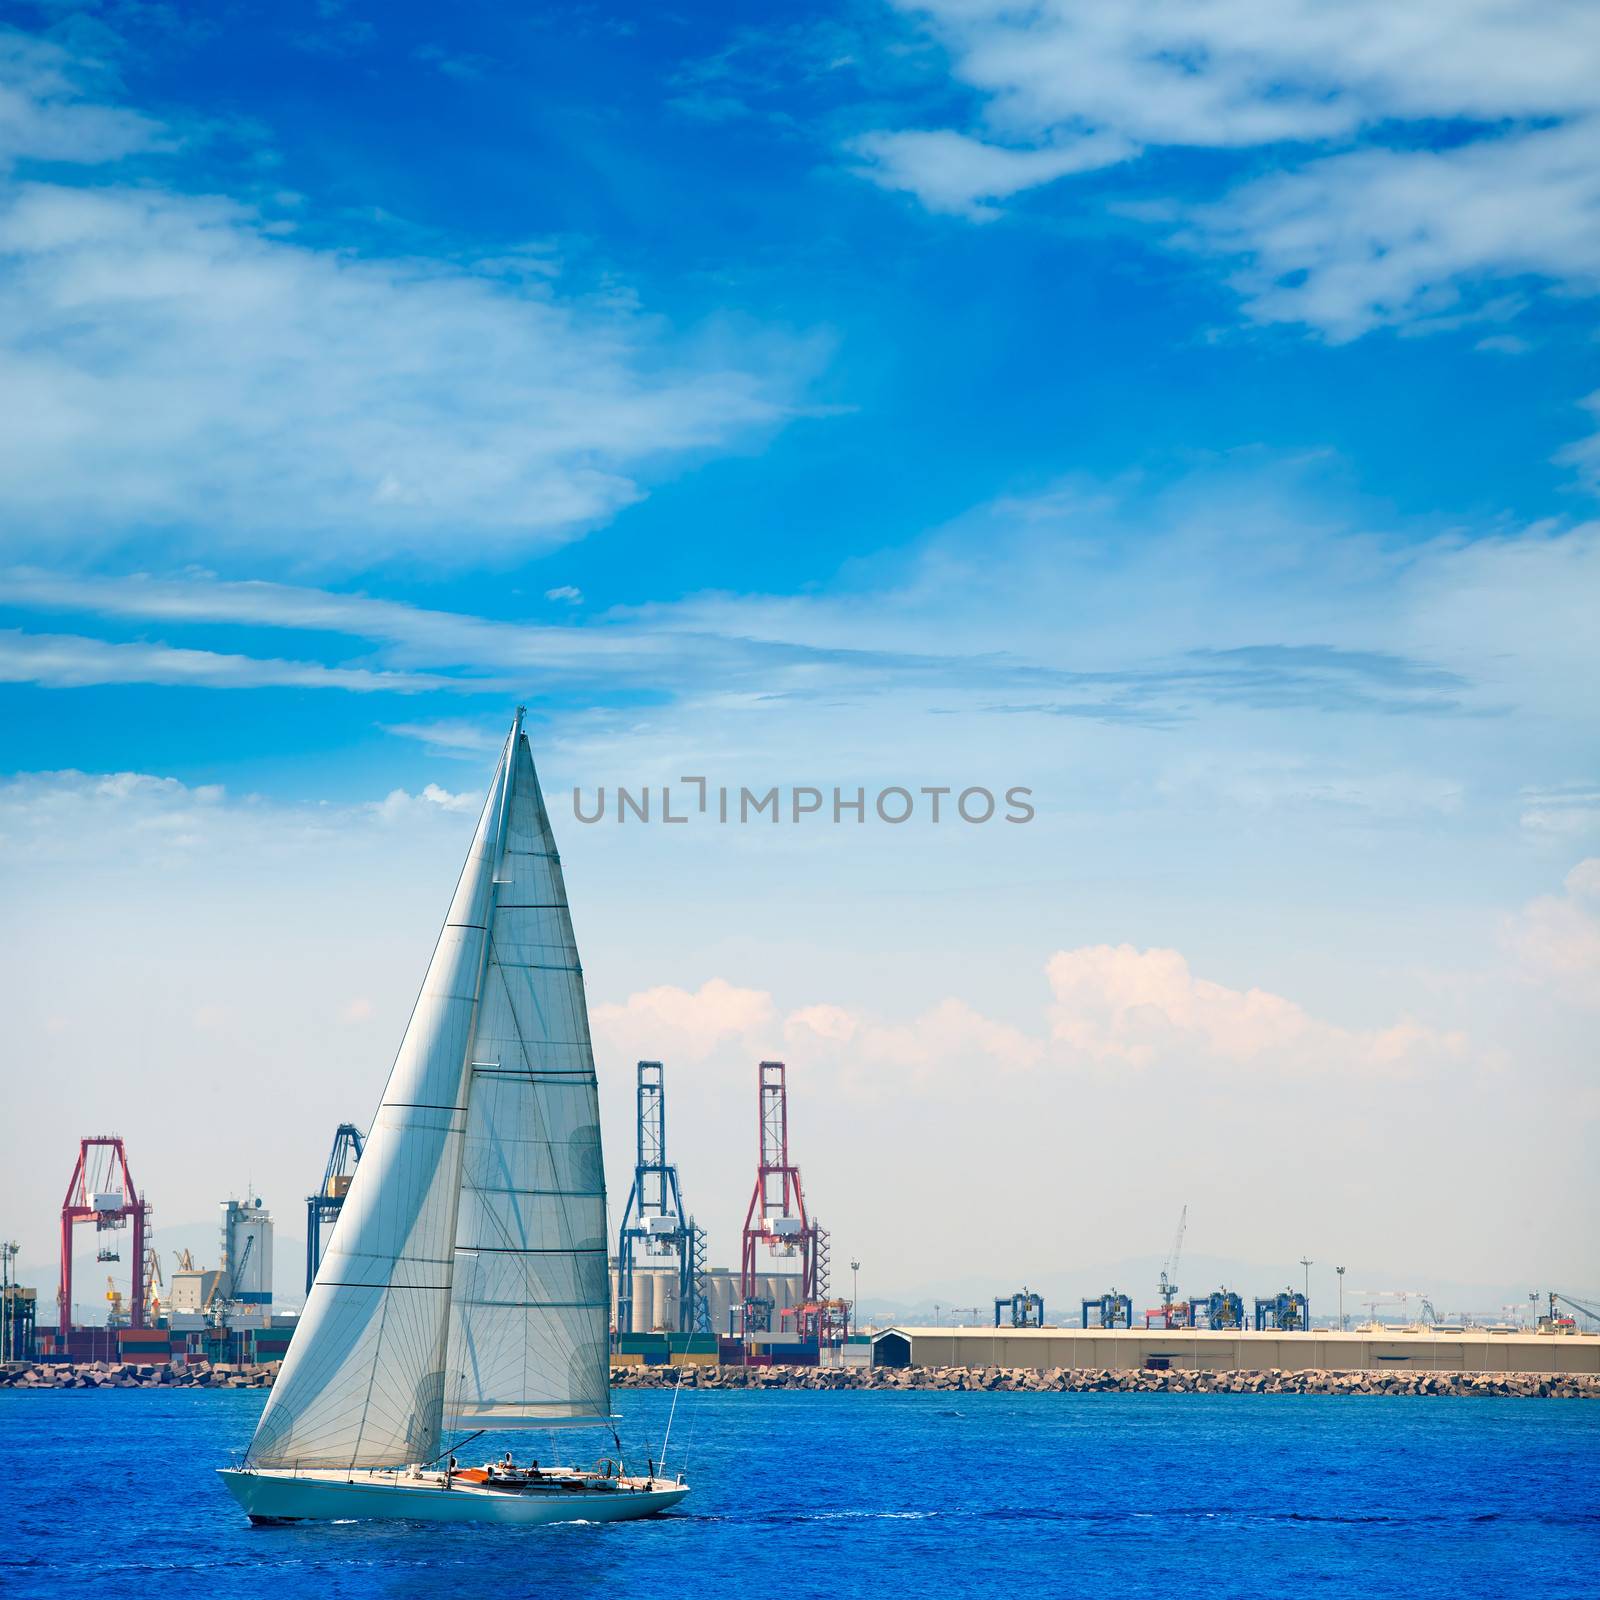 Valencia city port with sailboat and cranes in background by lunamarina